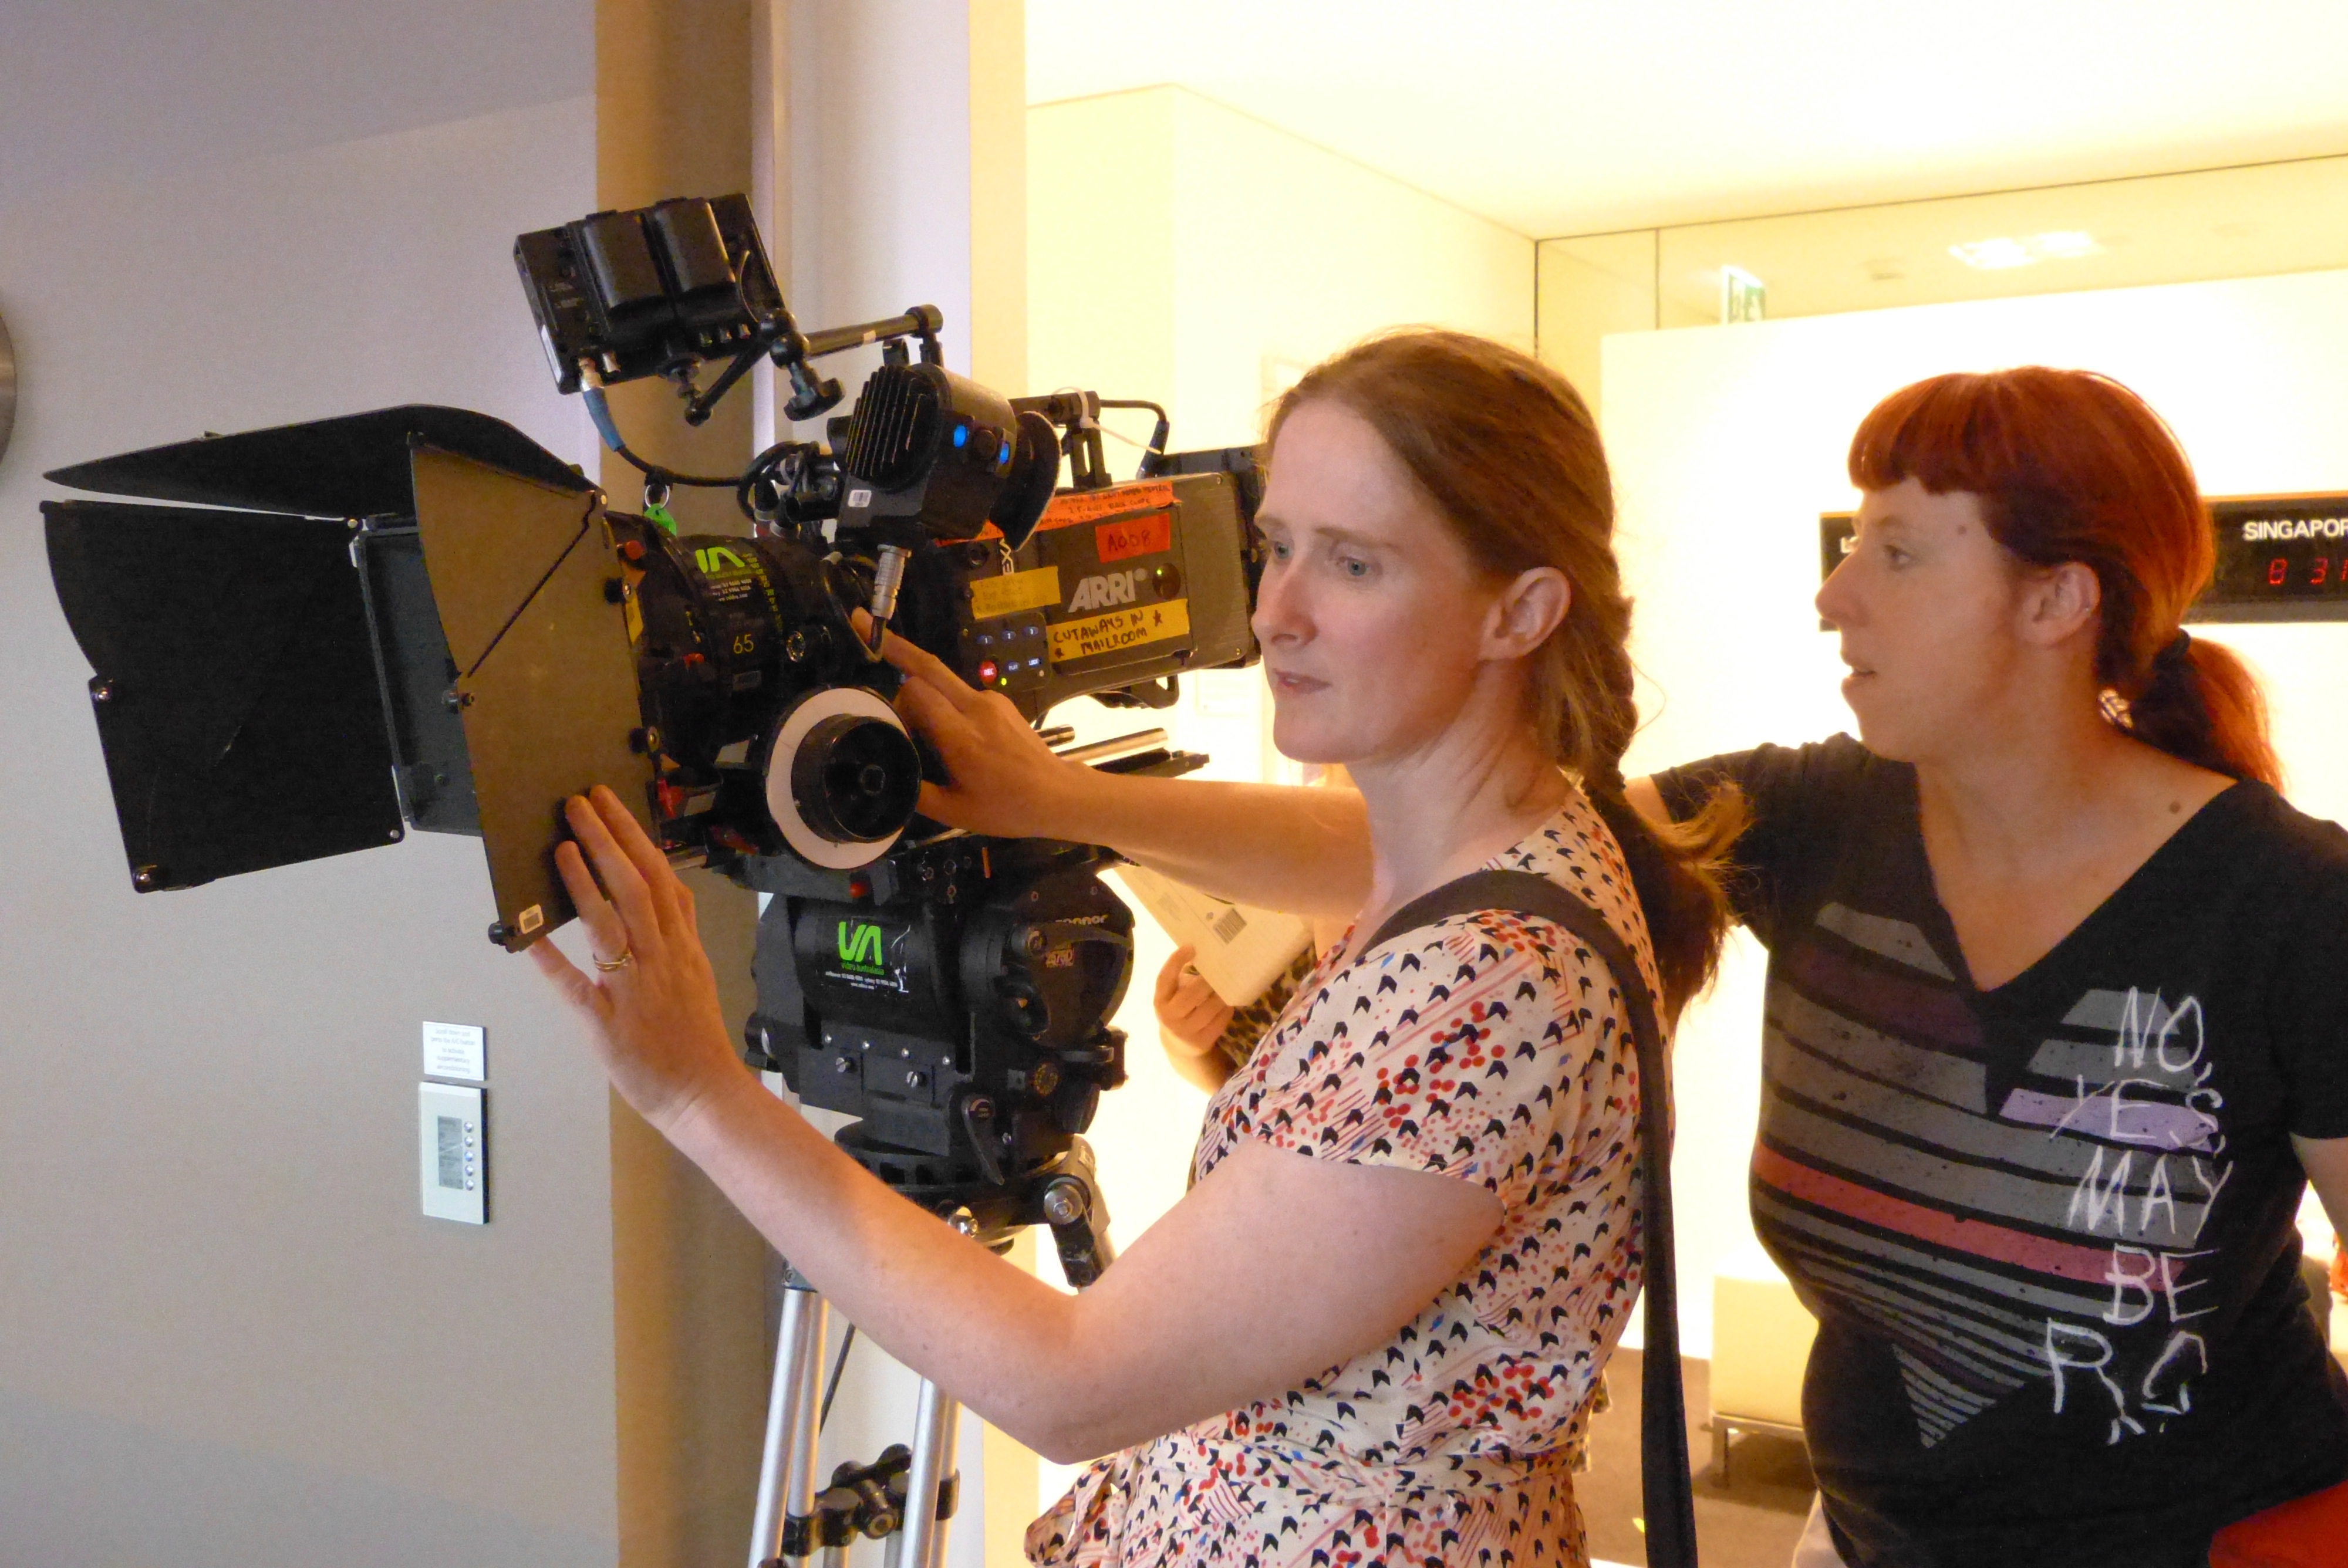 Louise Alston directs Photocopier 2012 with Director of Photography, Nicola Daley